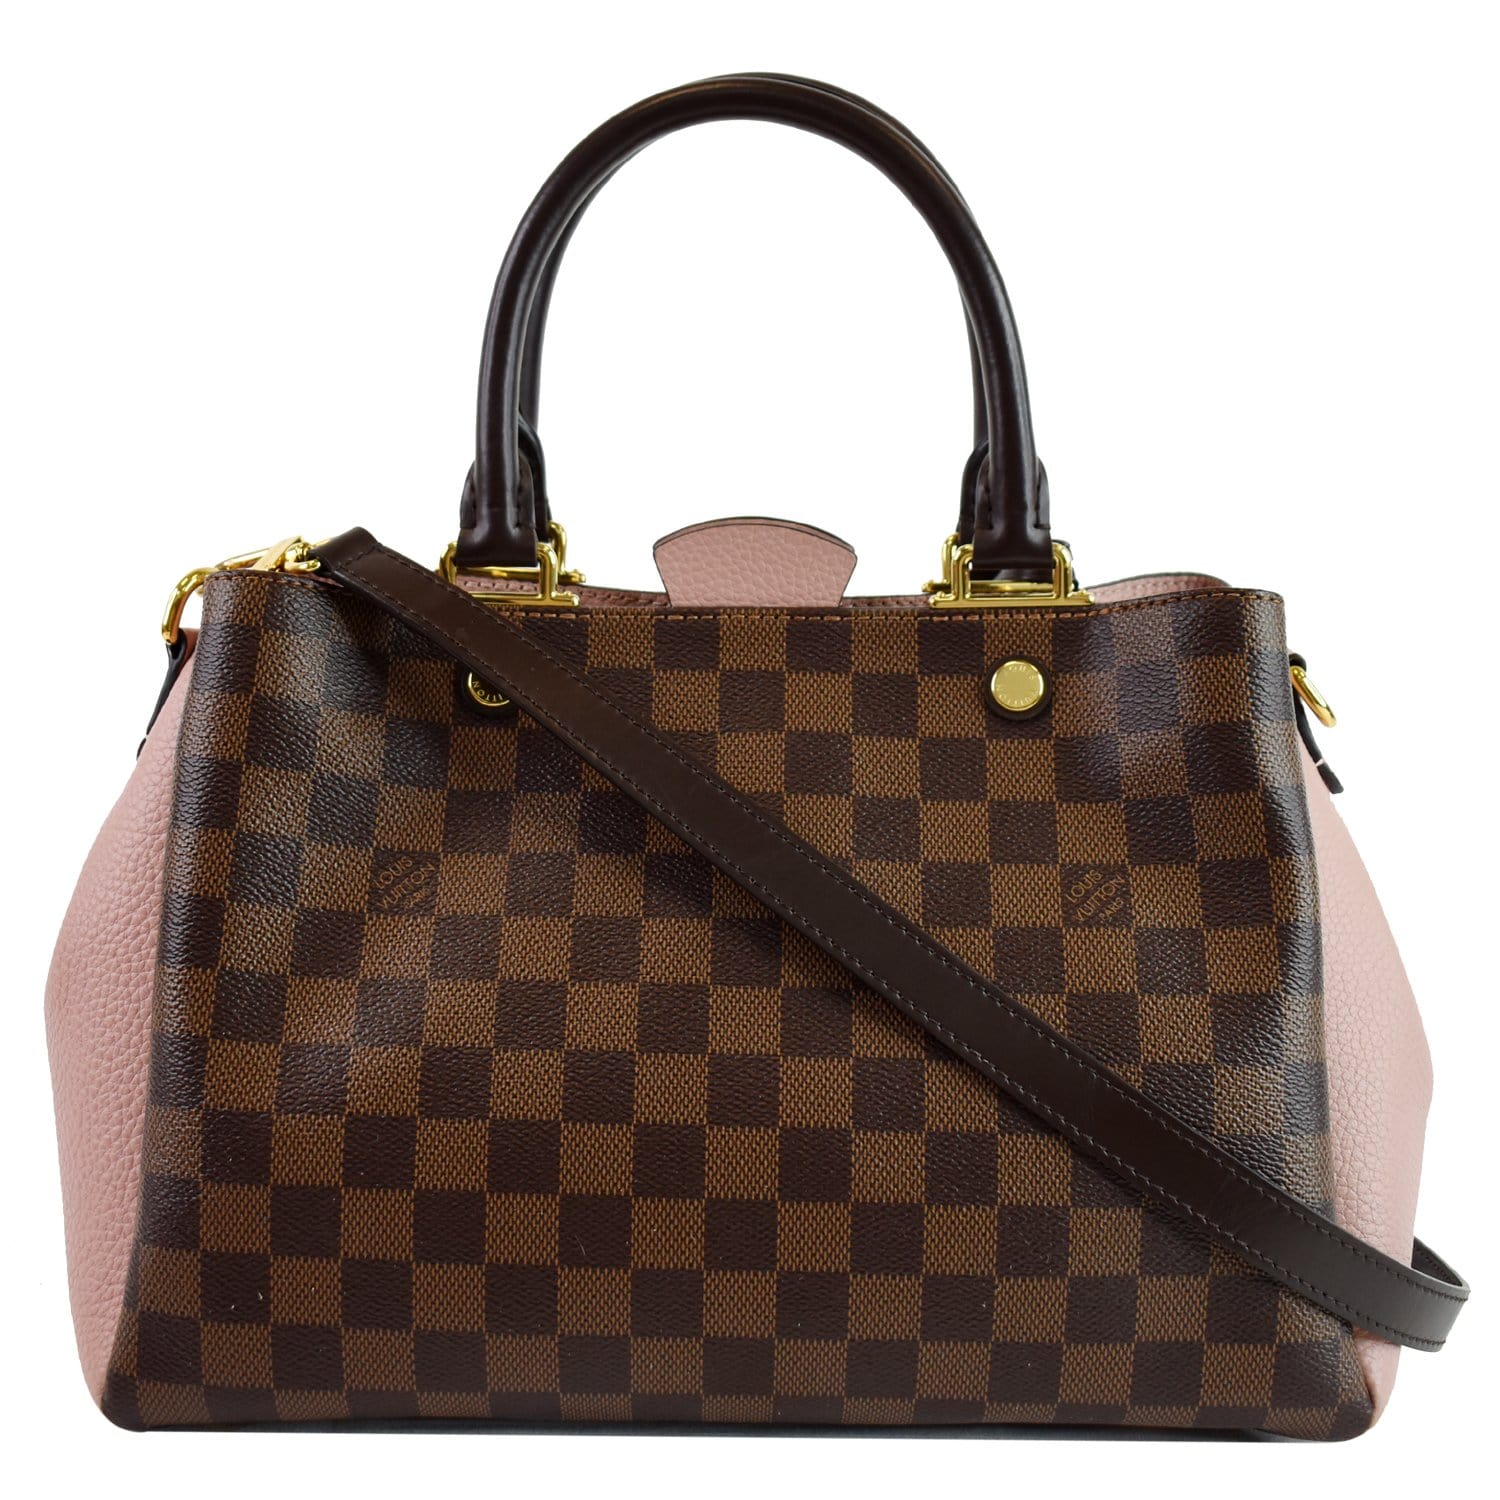 Louis Vuitton - Authenticated Double Zip Handbag - Cloth Brown Abstract for Women, Never Worn